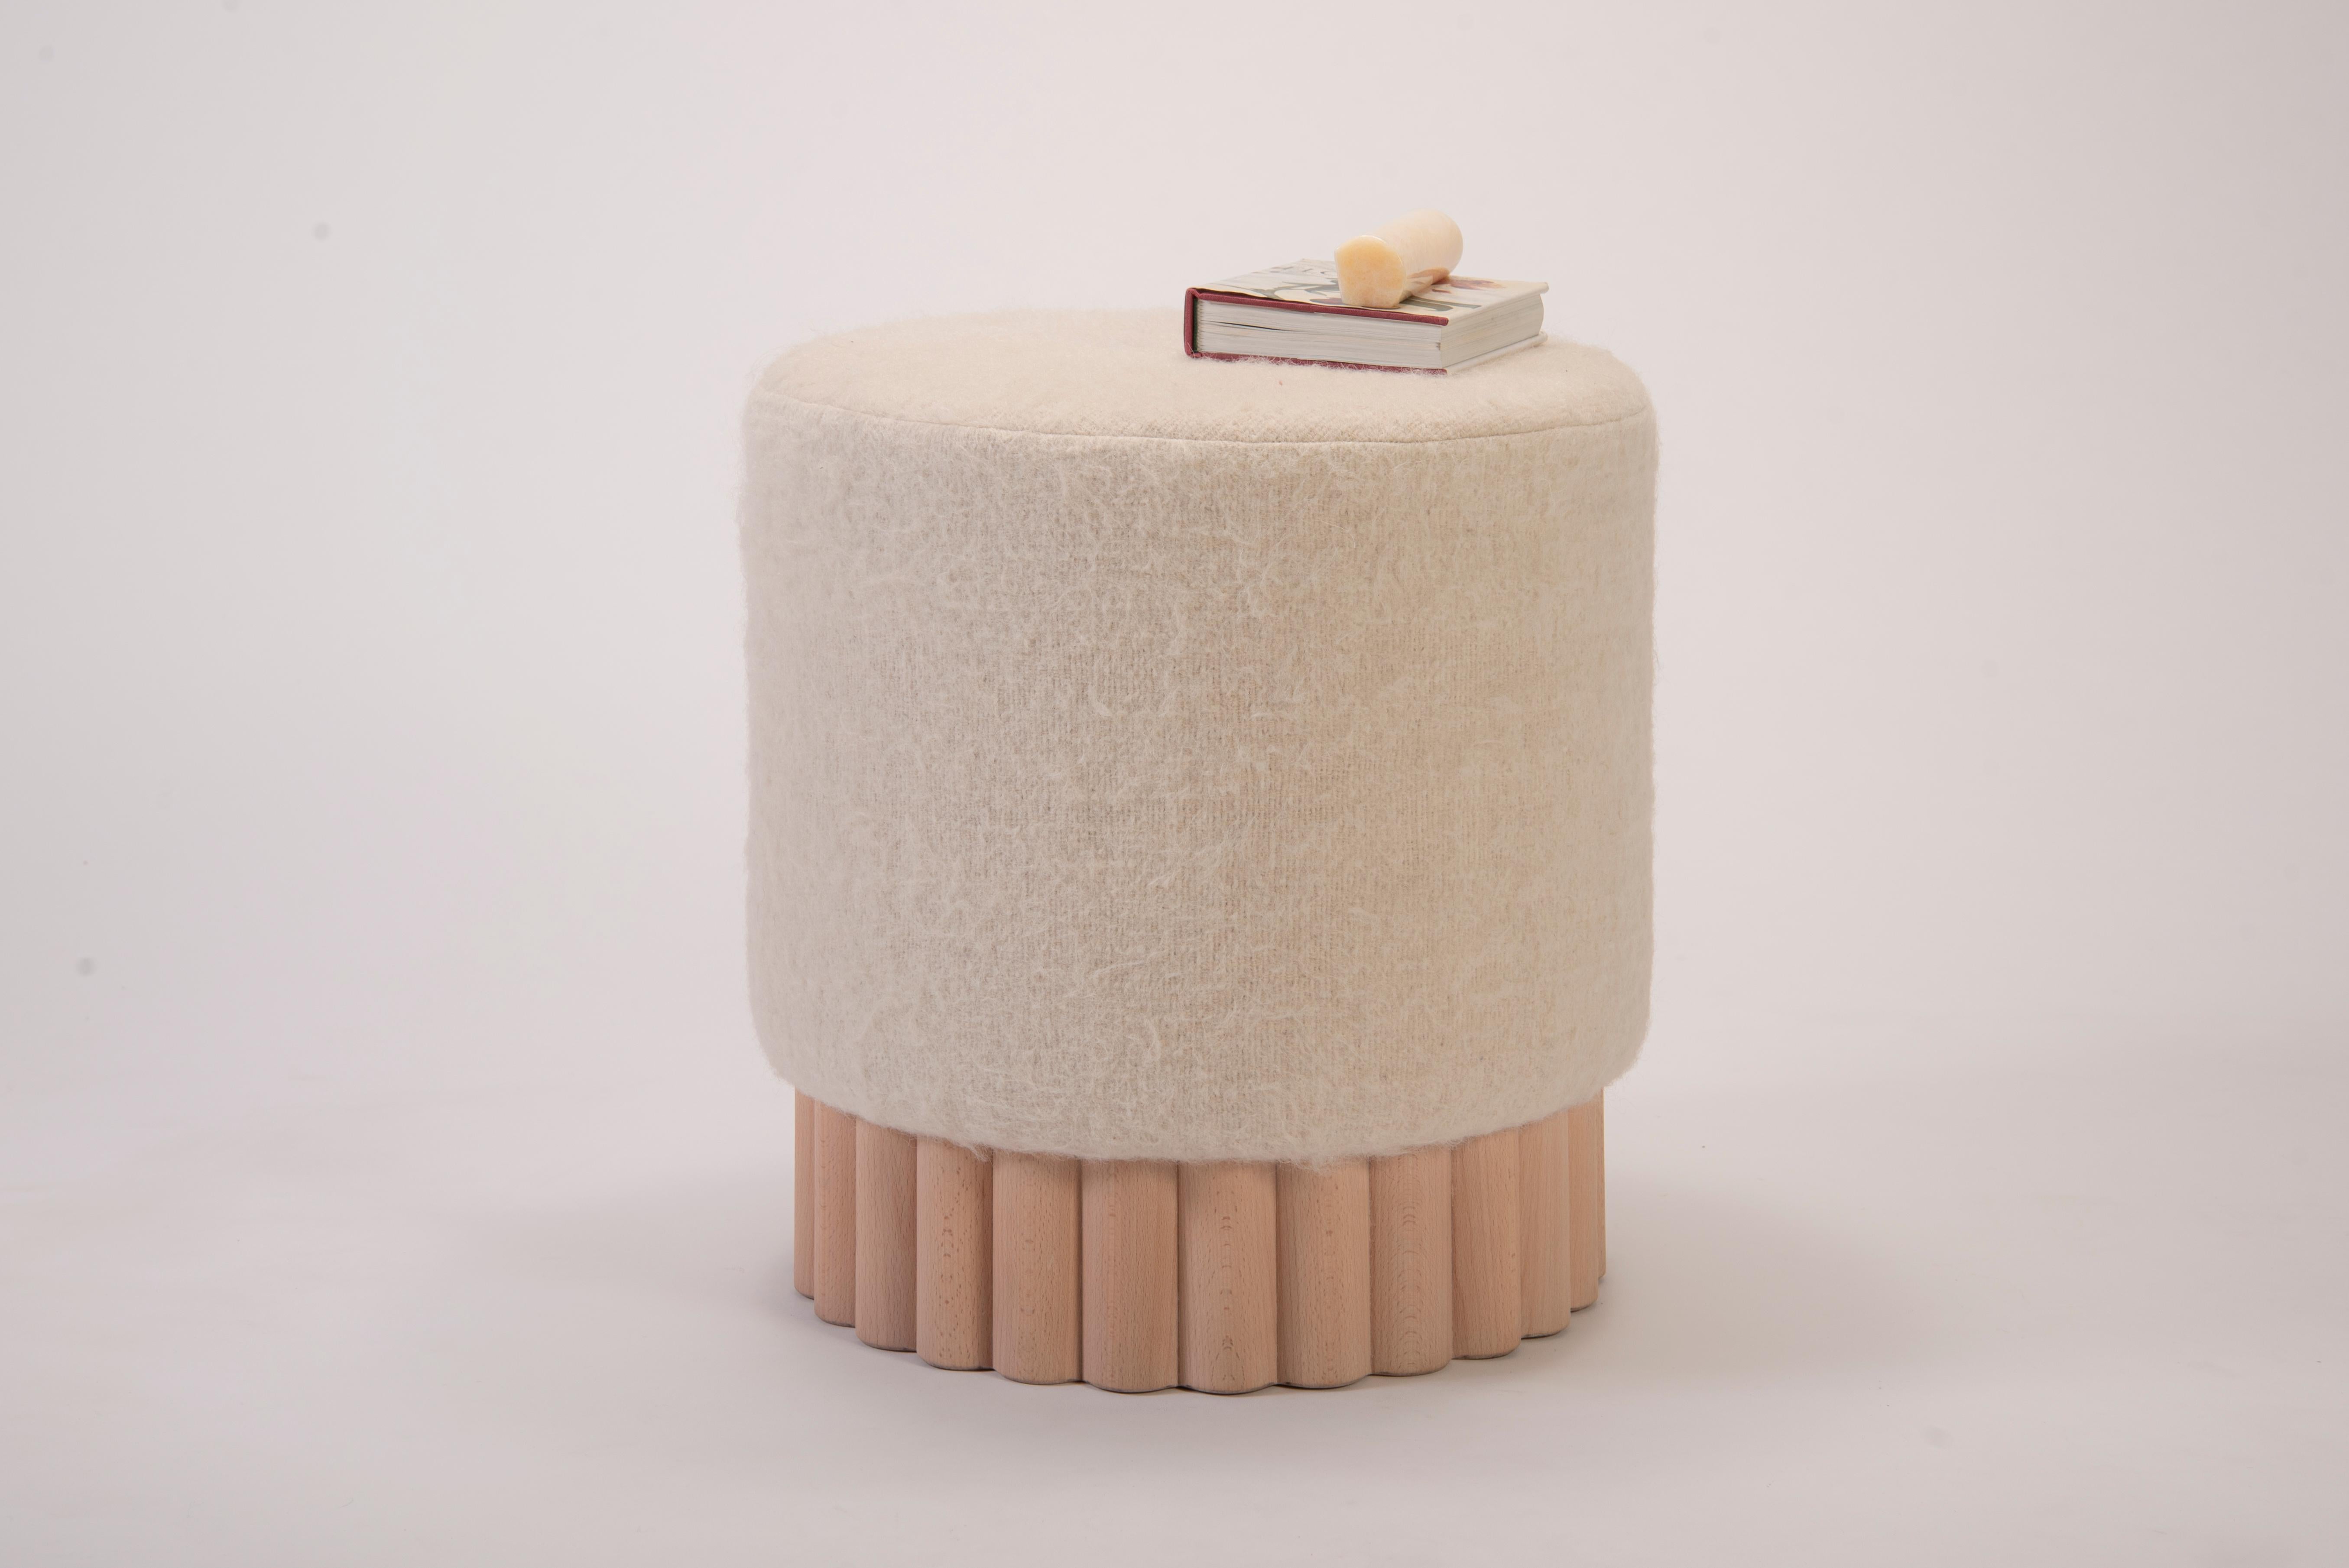 Mexican Loto Pouf, Beech, Tzalam or Blackened Oak Wood and Leather or Fabric